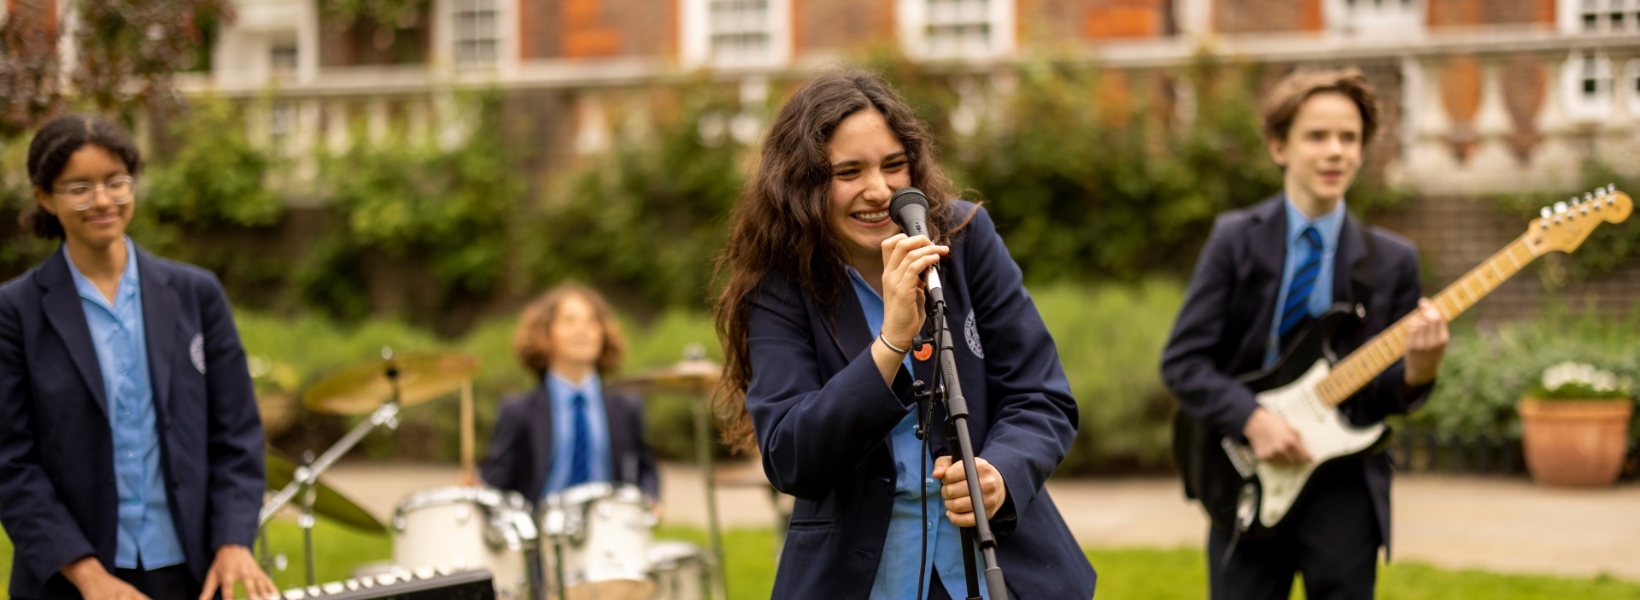 Senior pupils in a band playing their instruments and singing in the campus of Ibstock Place School